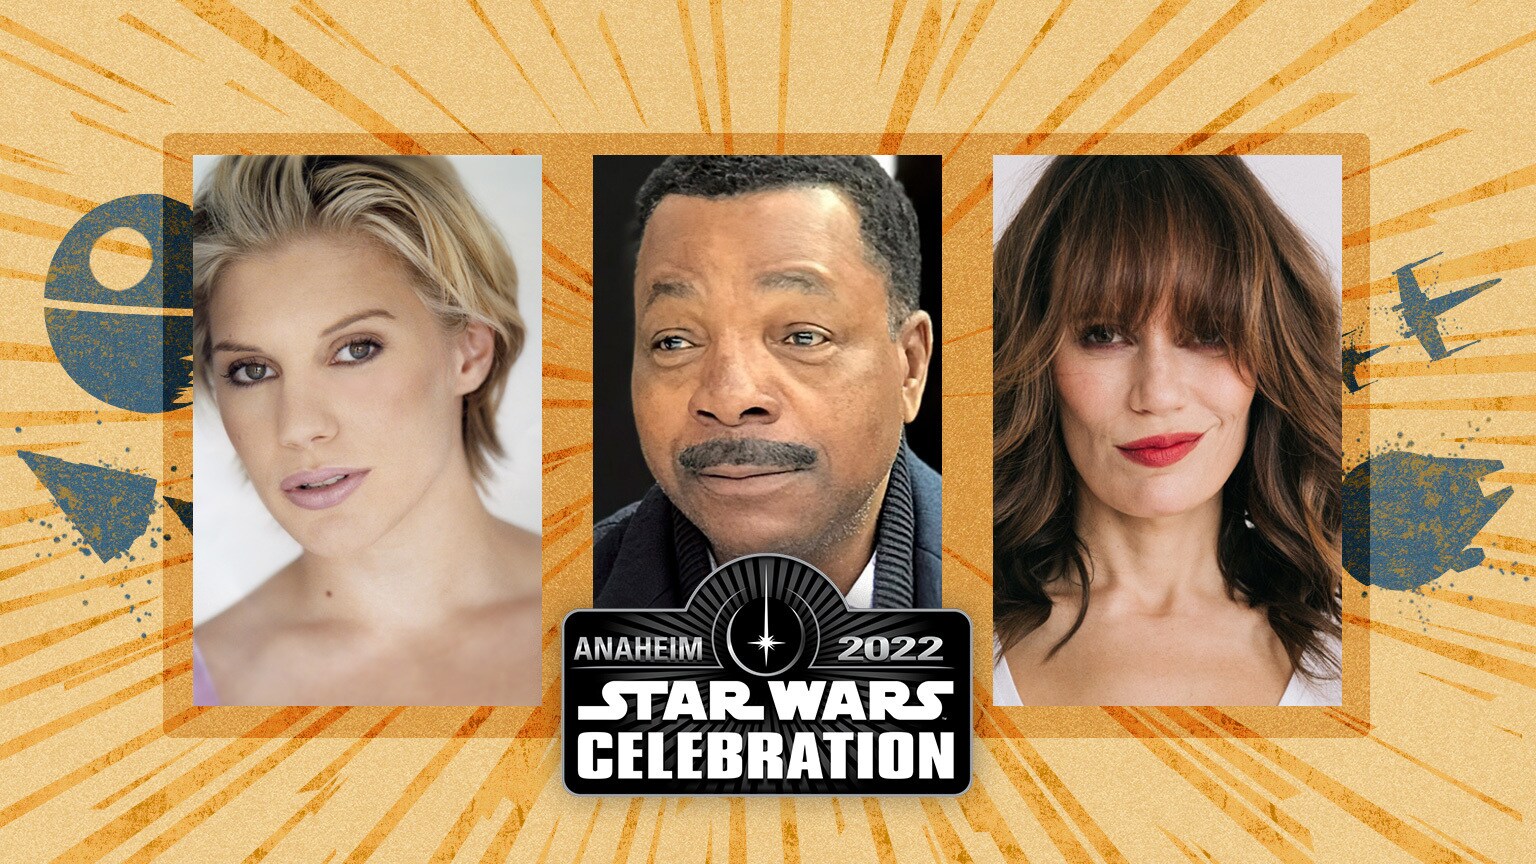 Katee Sackhoff, Carl Weathers, Emily Swallow, and More Confirmed for Star Wars Celebration Anaheim 2022